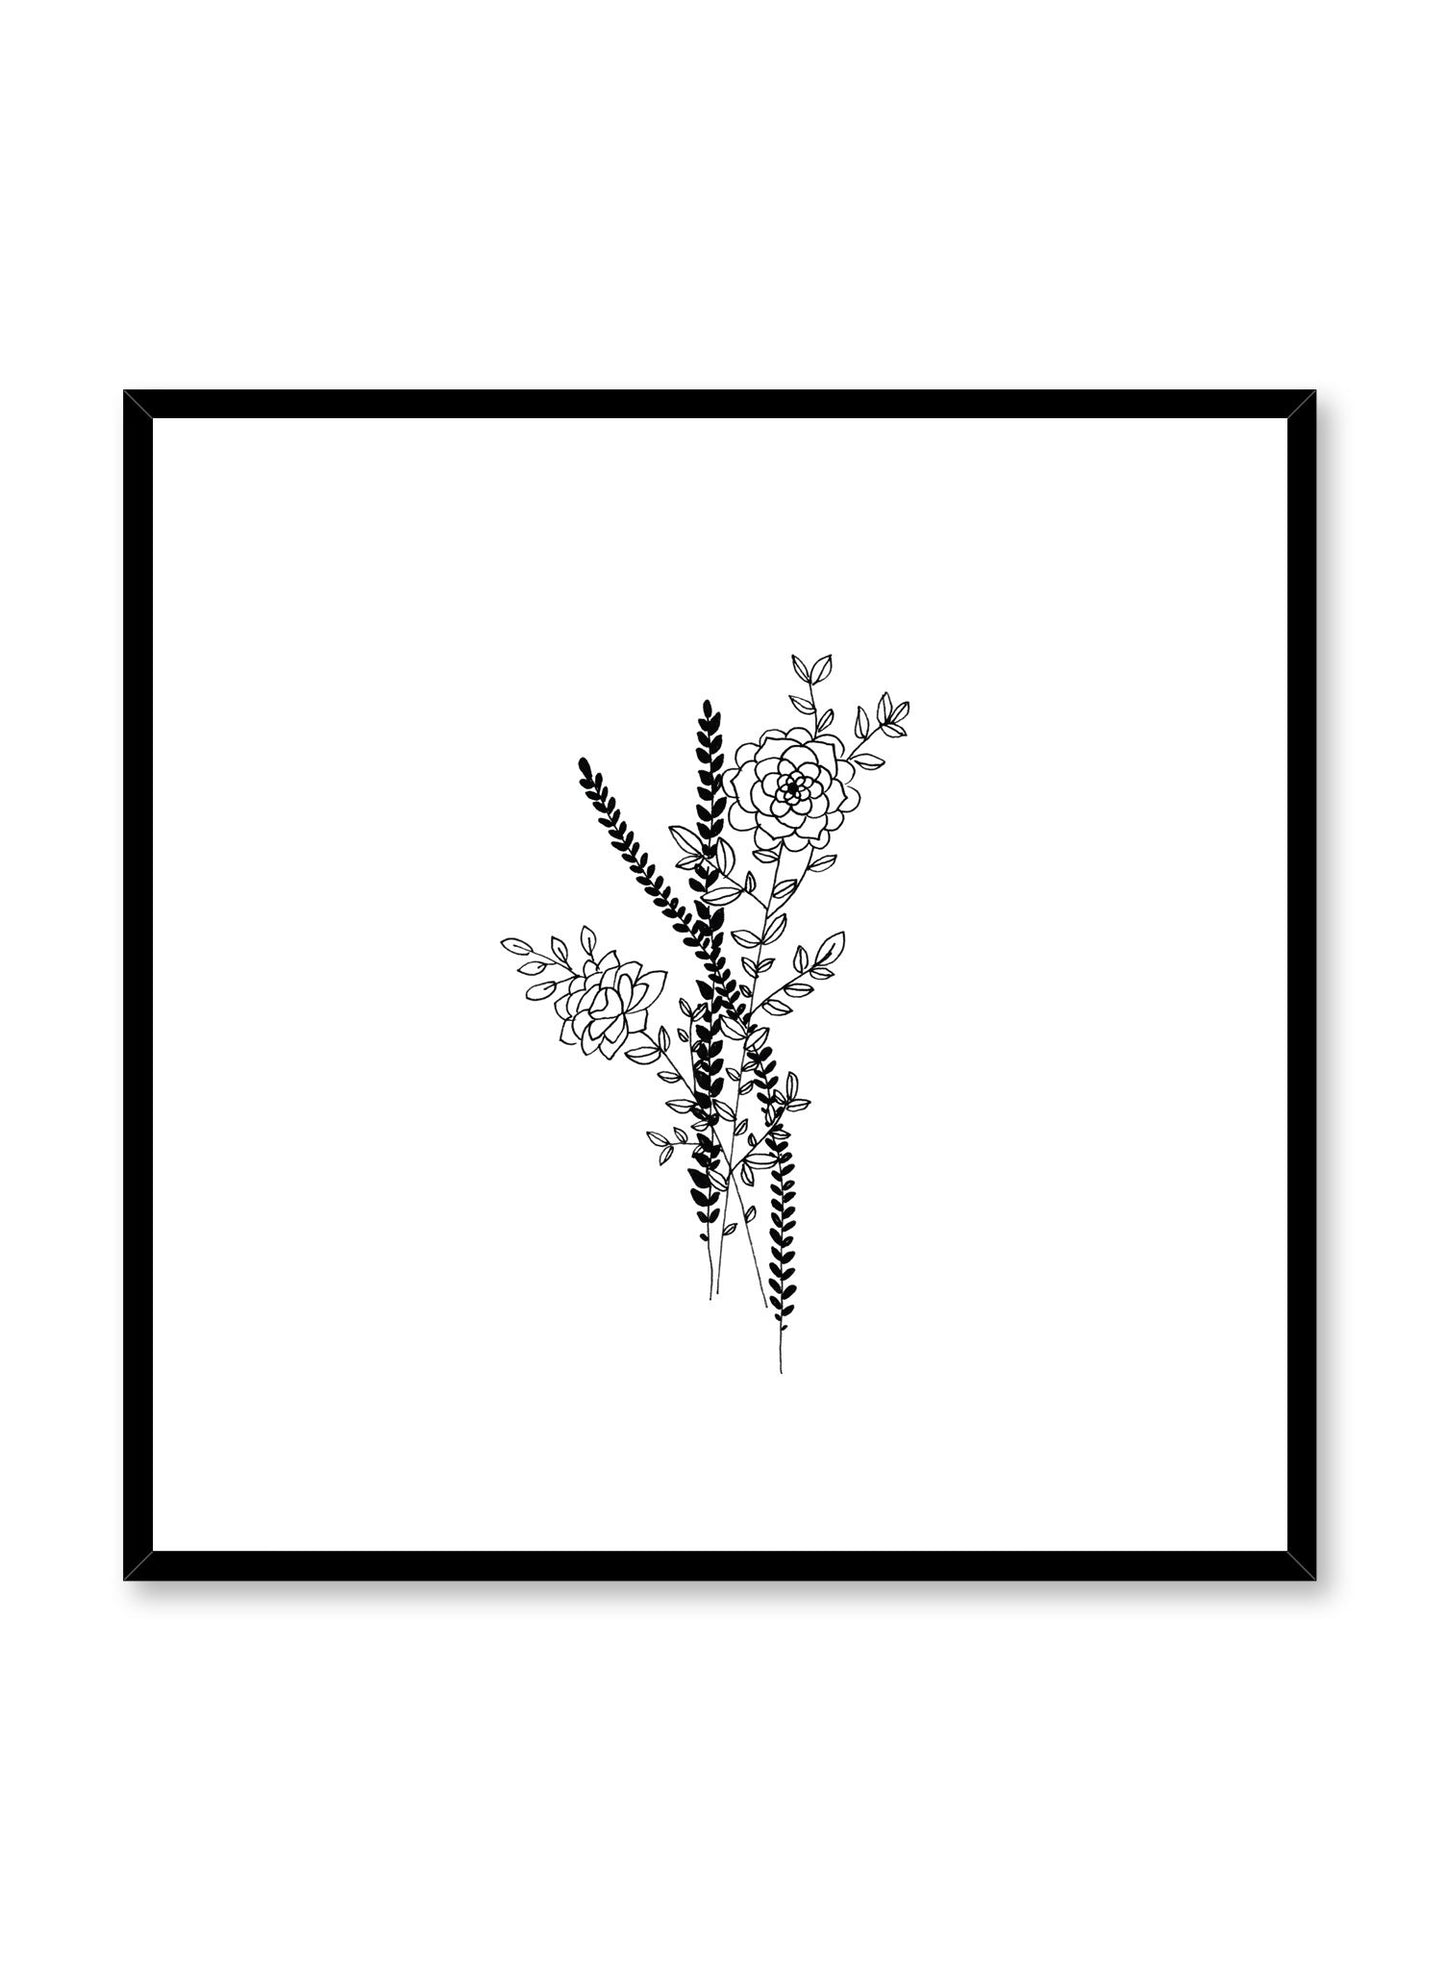 Modern minimalist poster by Opposite Wall with abstract line art illustration of Arrangement